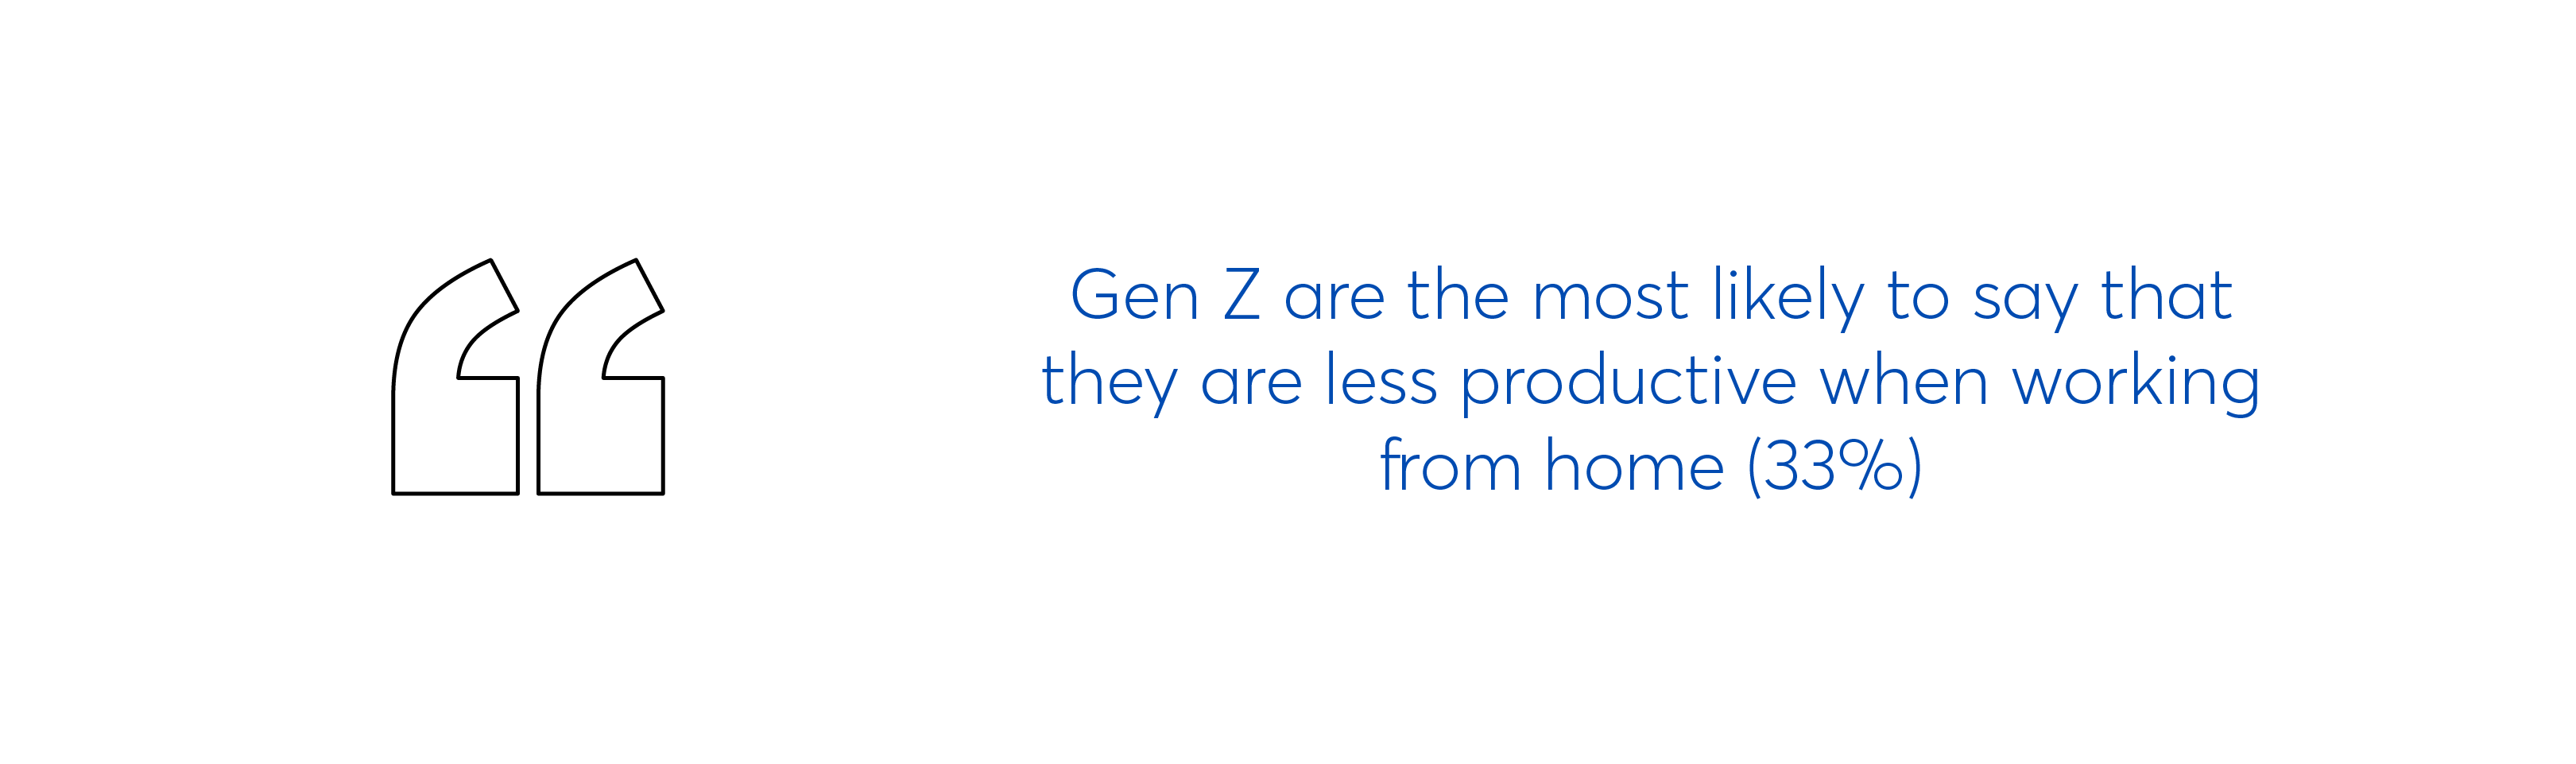 Gen Z are less productive from home